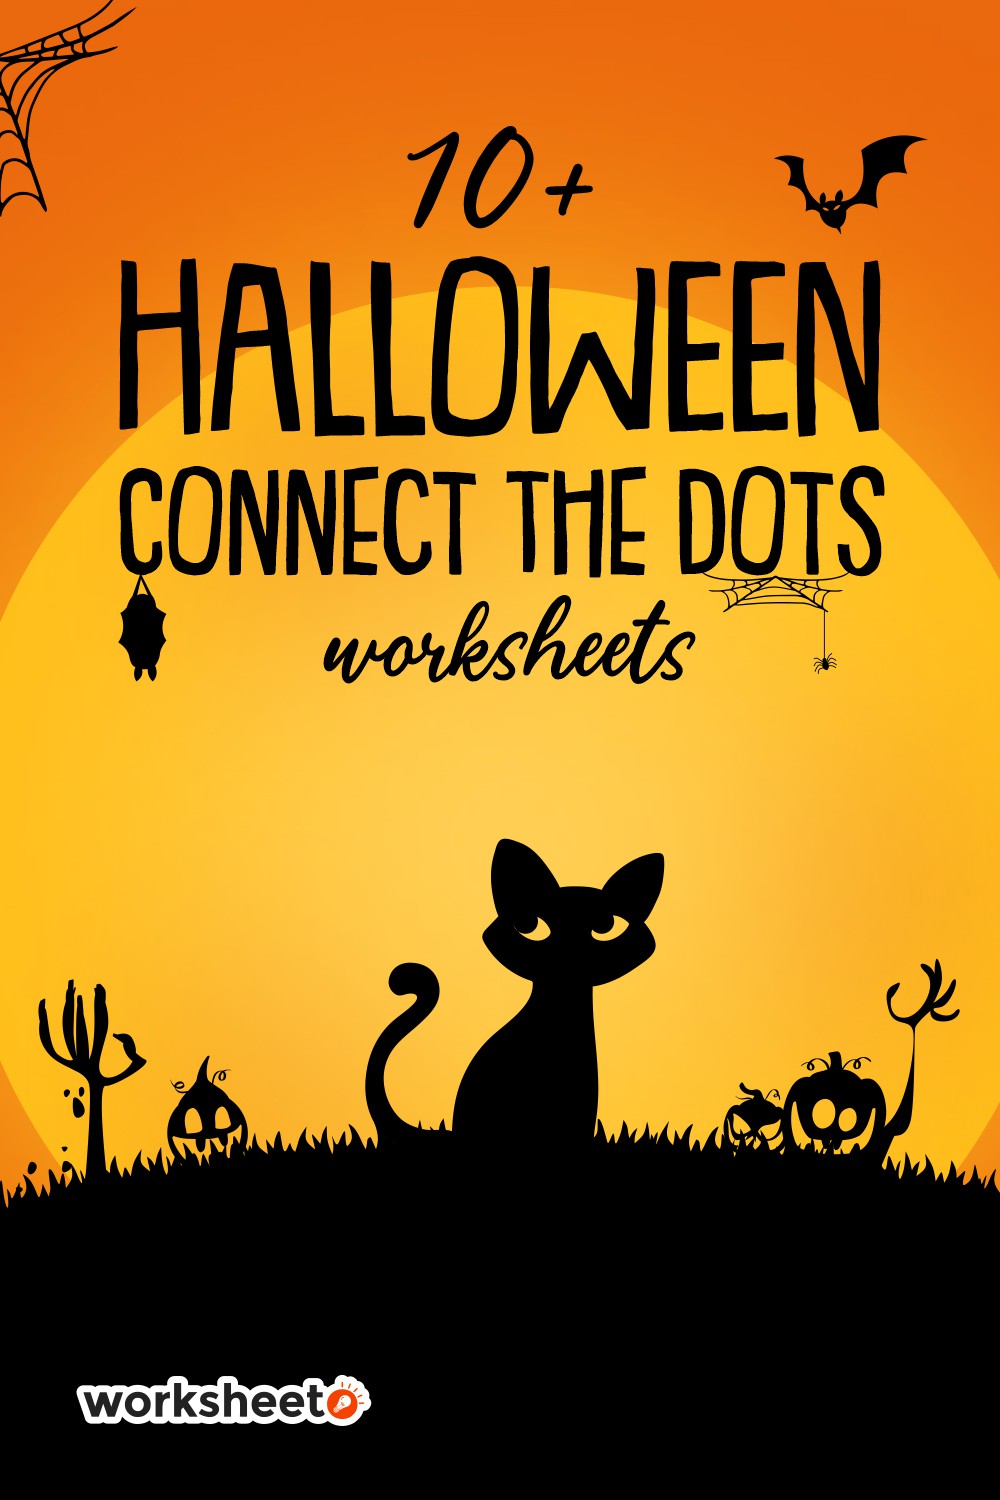 Halloween Connect the Dots Worksheets